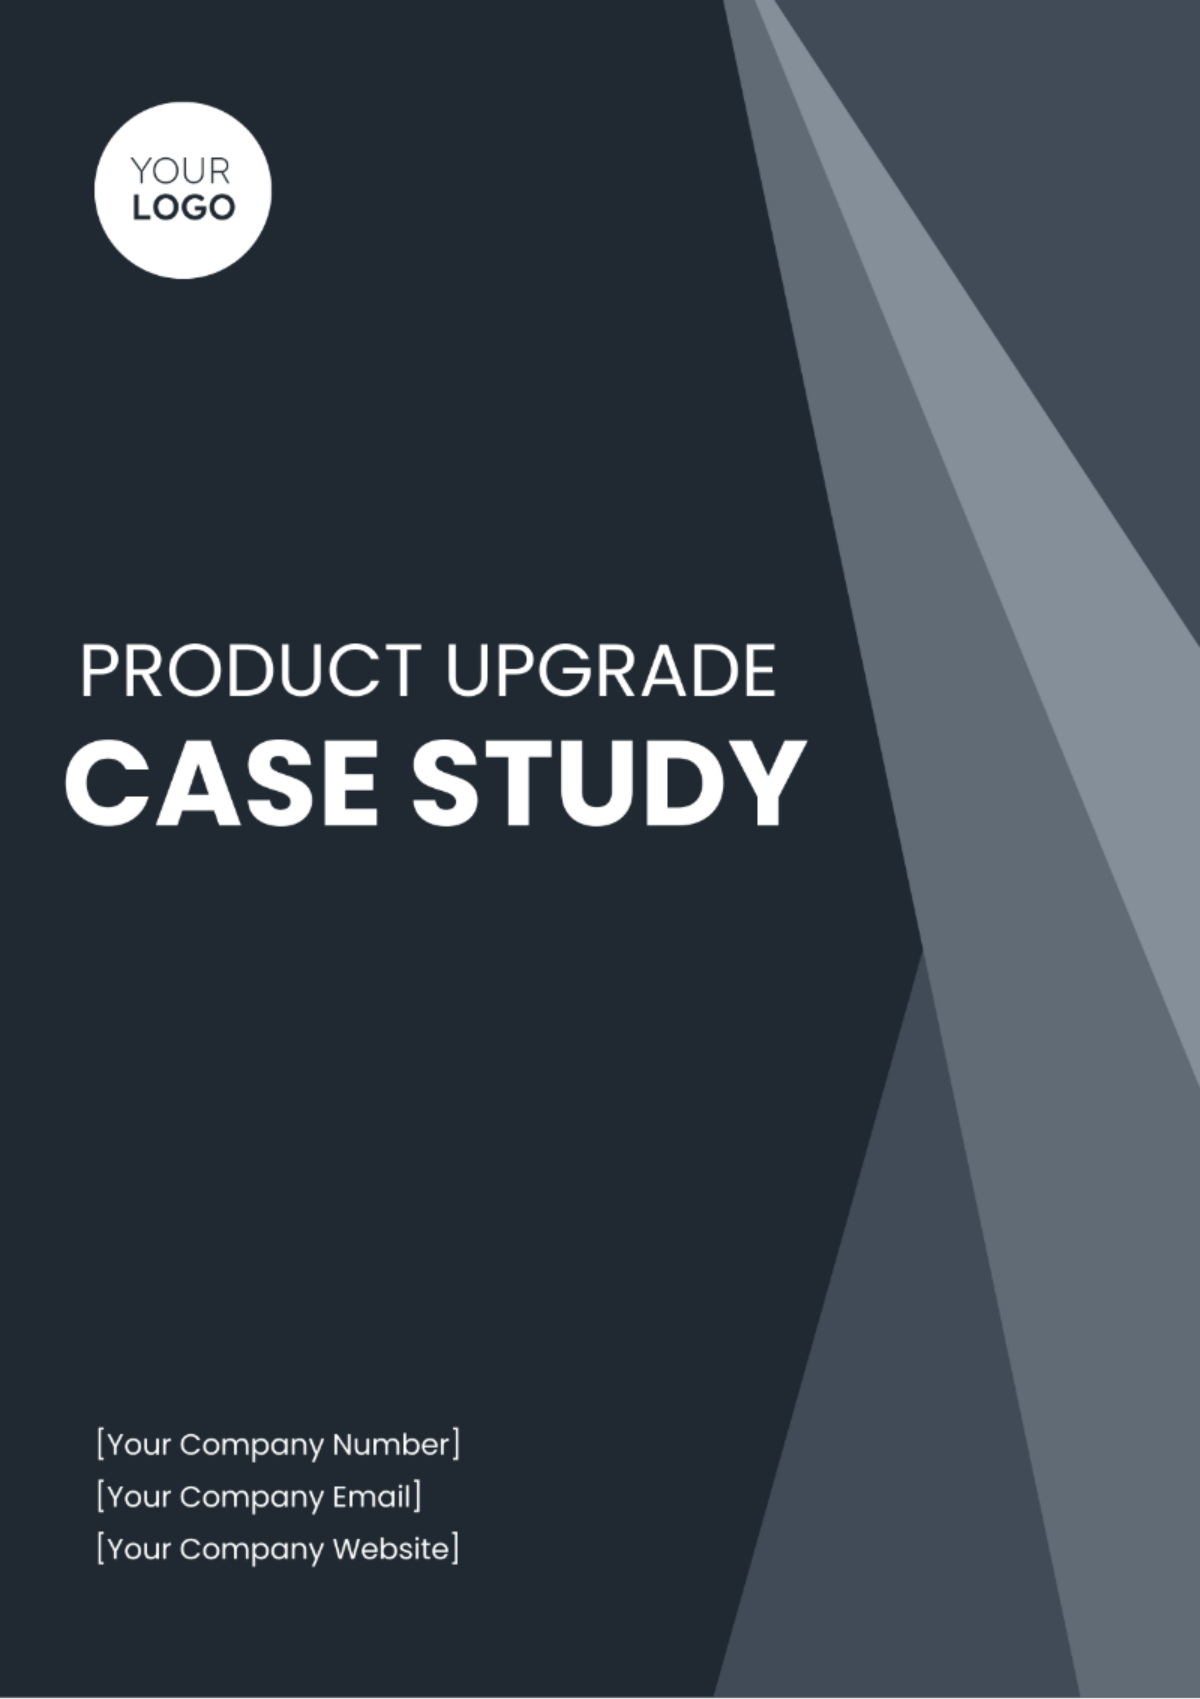 Product Upgrade Case Study Template